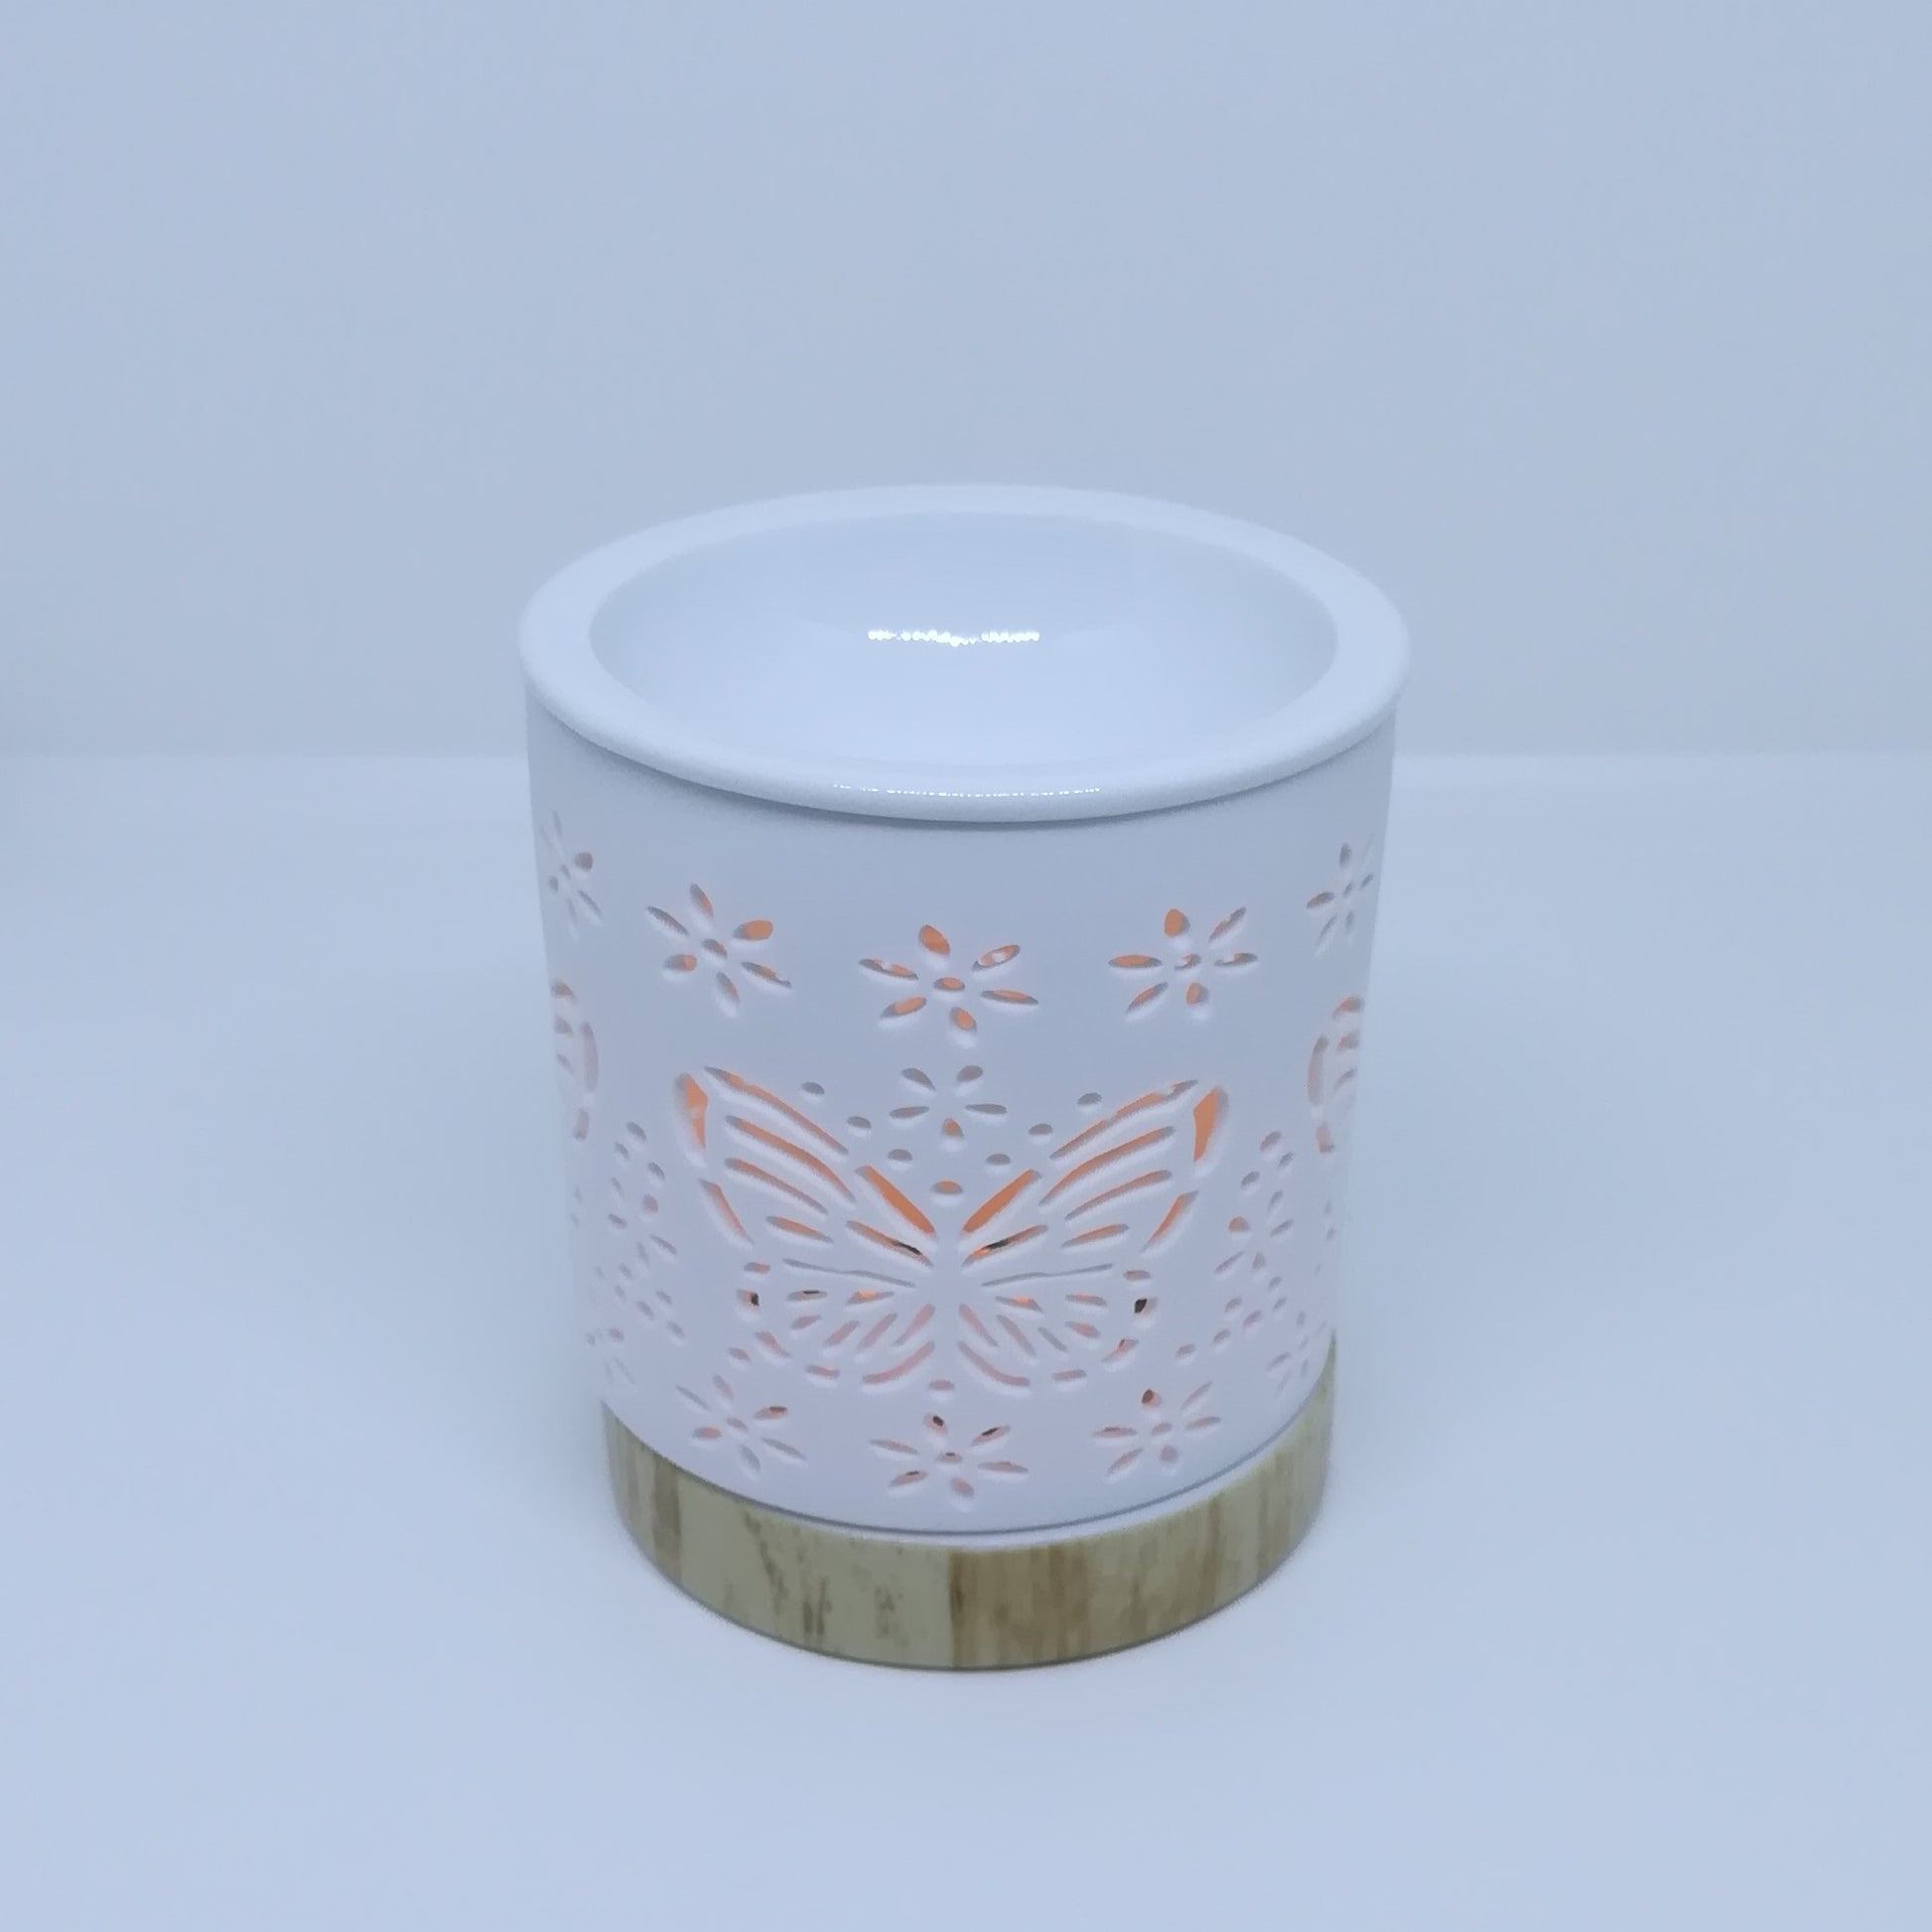 Ceramic white wax melt burner with ceramic wood effect base pictured under natural light with Butterfly apertures illuminated by the tealight within. (Tealight not included)